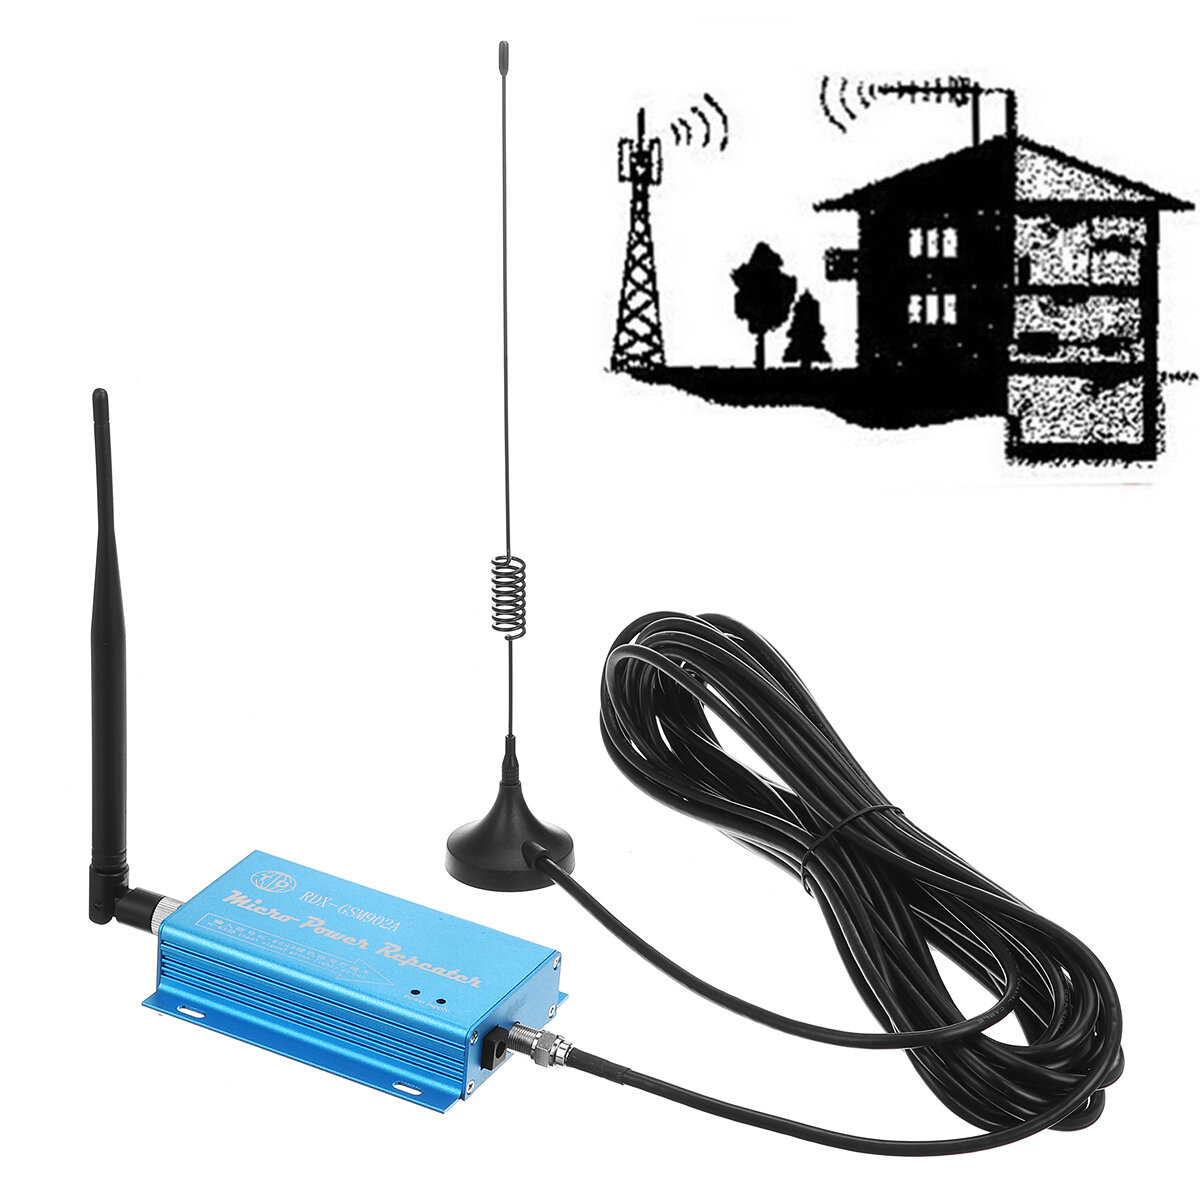 

2g/3g/4g Full Set GSM 900MHz Mobile Signal Booster GSM 900 better call Cell Phone Cellular Repeater Amplifier+ Antenna